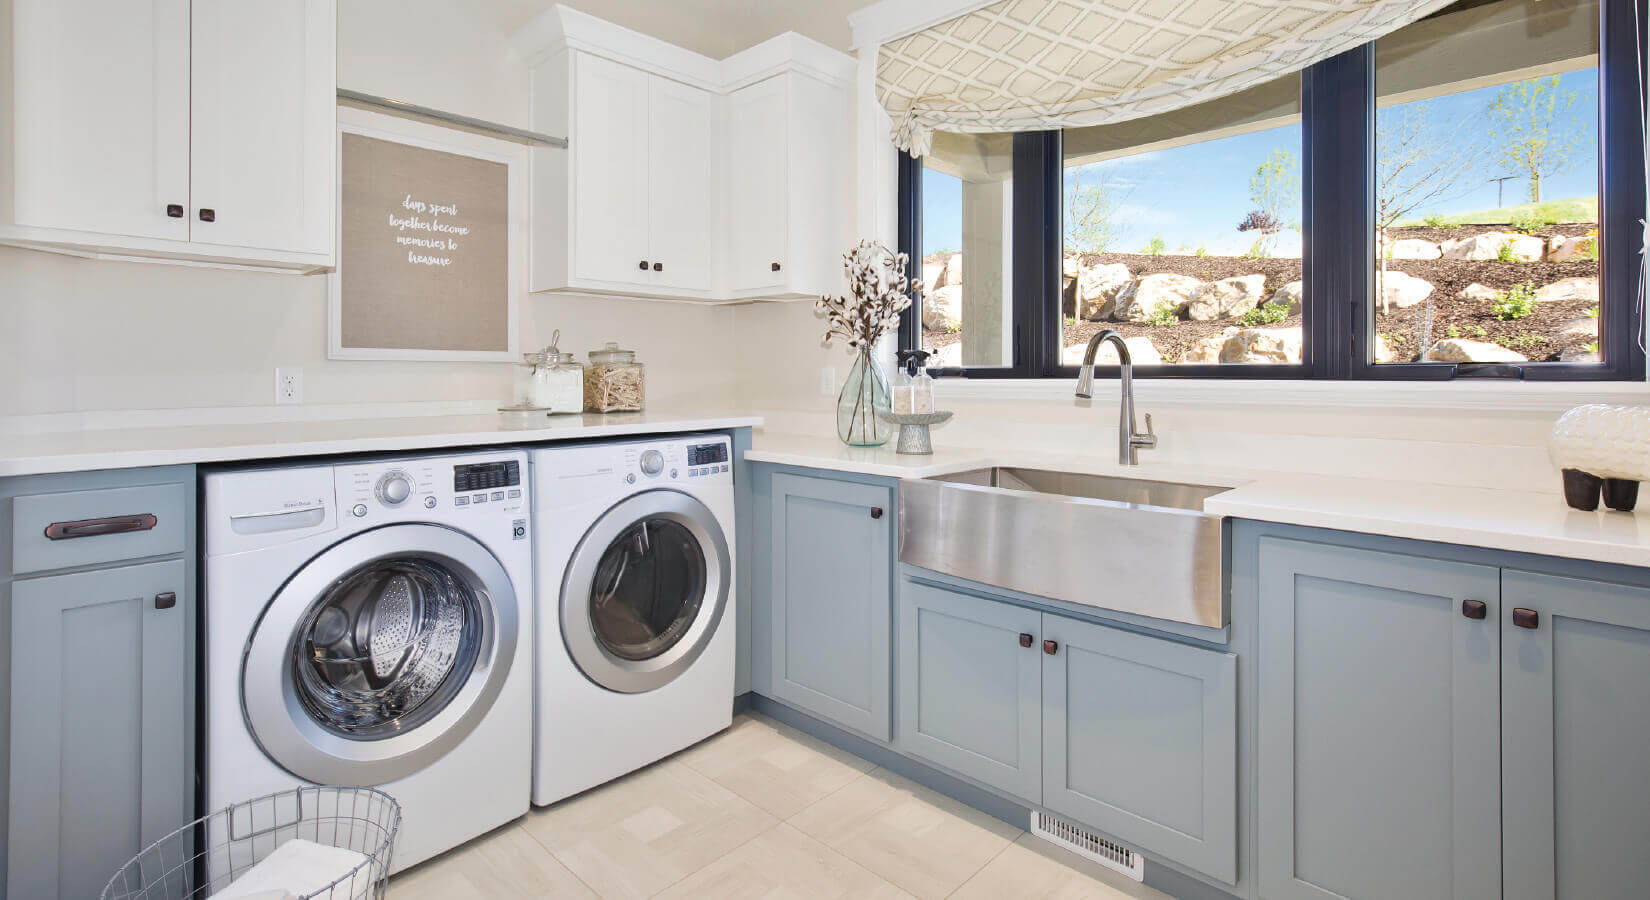 Large laundry room with white upper cabinets, blue lower cabinets, and white appliances.